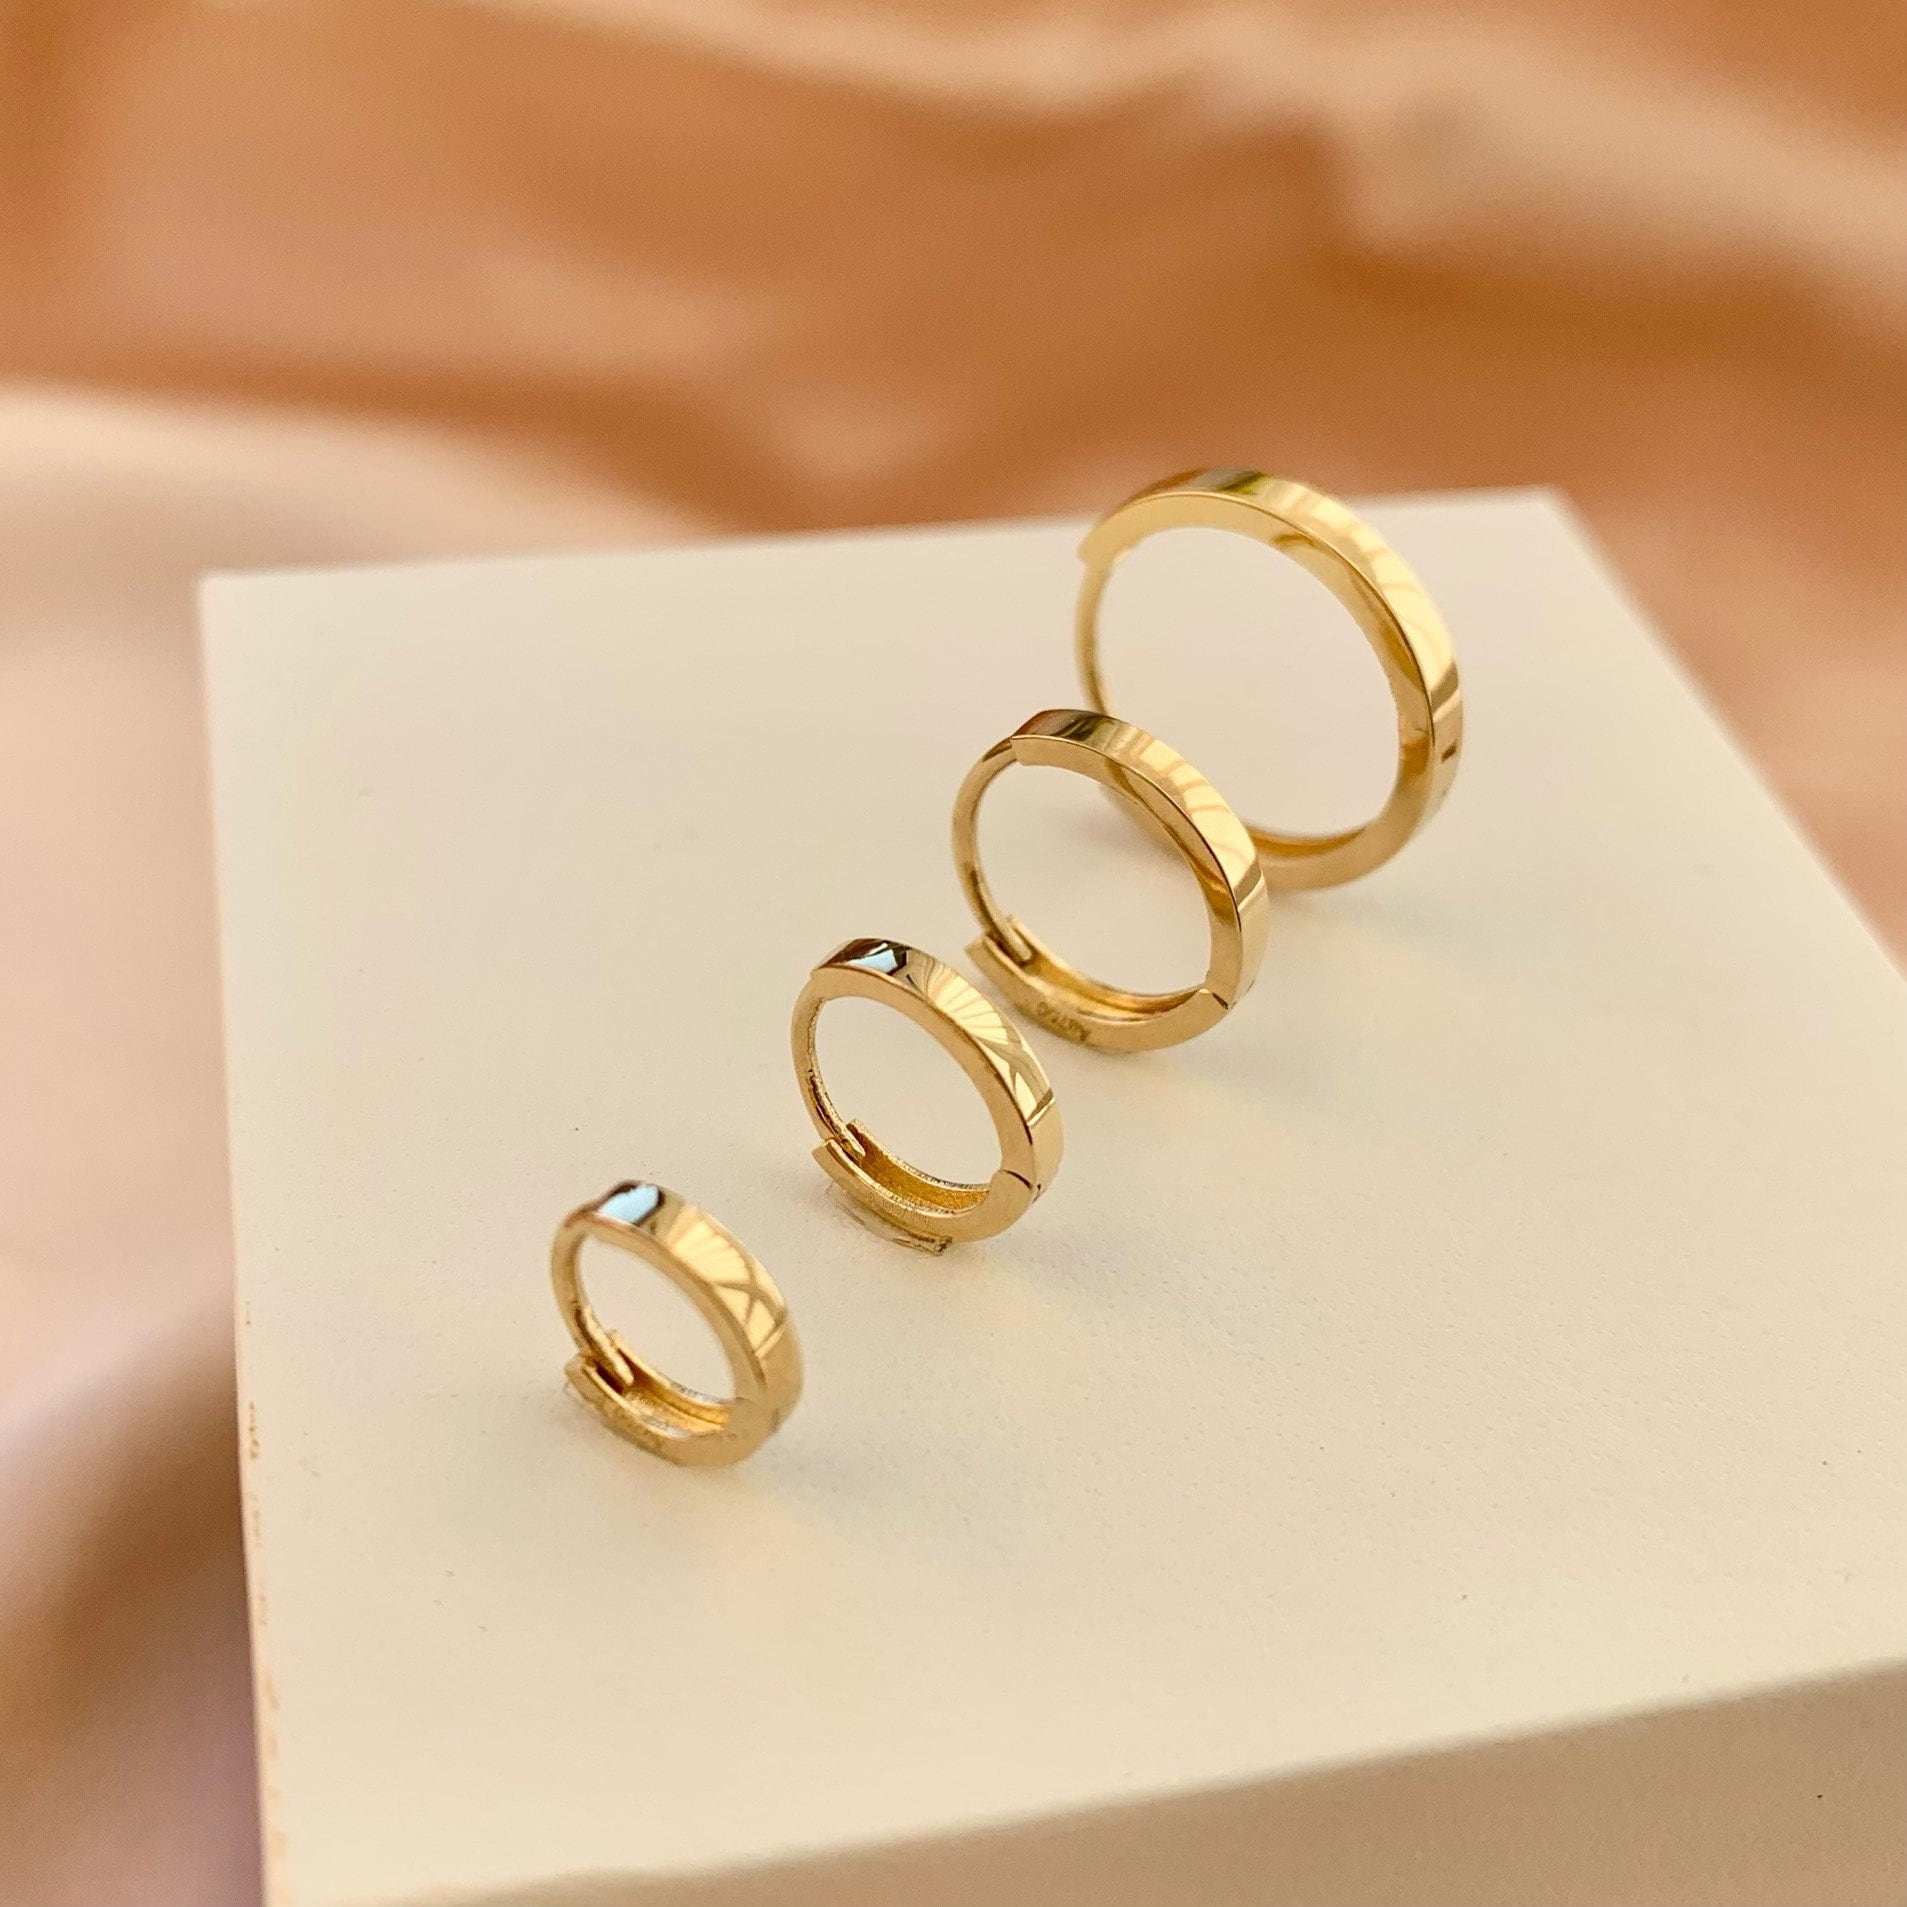 Ready to ship!14K/18K Solid Gold Dainty Huggie Hoop Earrings, 6mm 7mm 9mm 12mm Huggies, Real Gold Huggies, Solid Gold Small Unisex Huggies